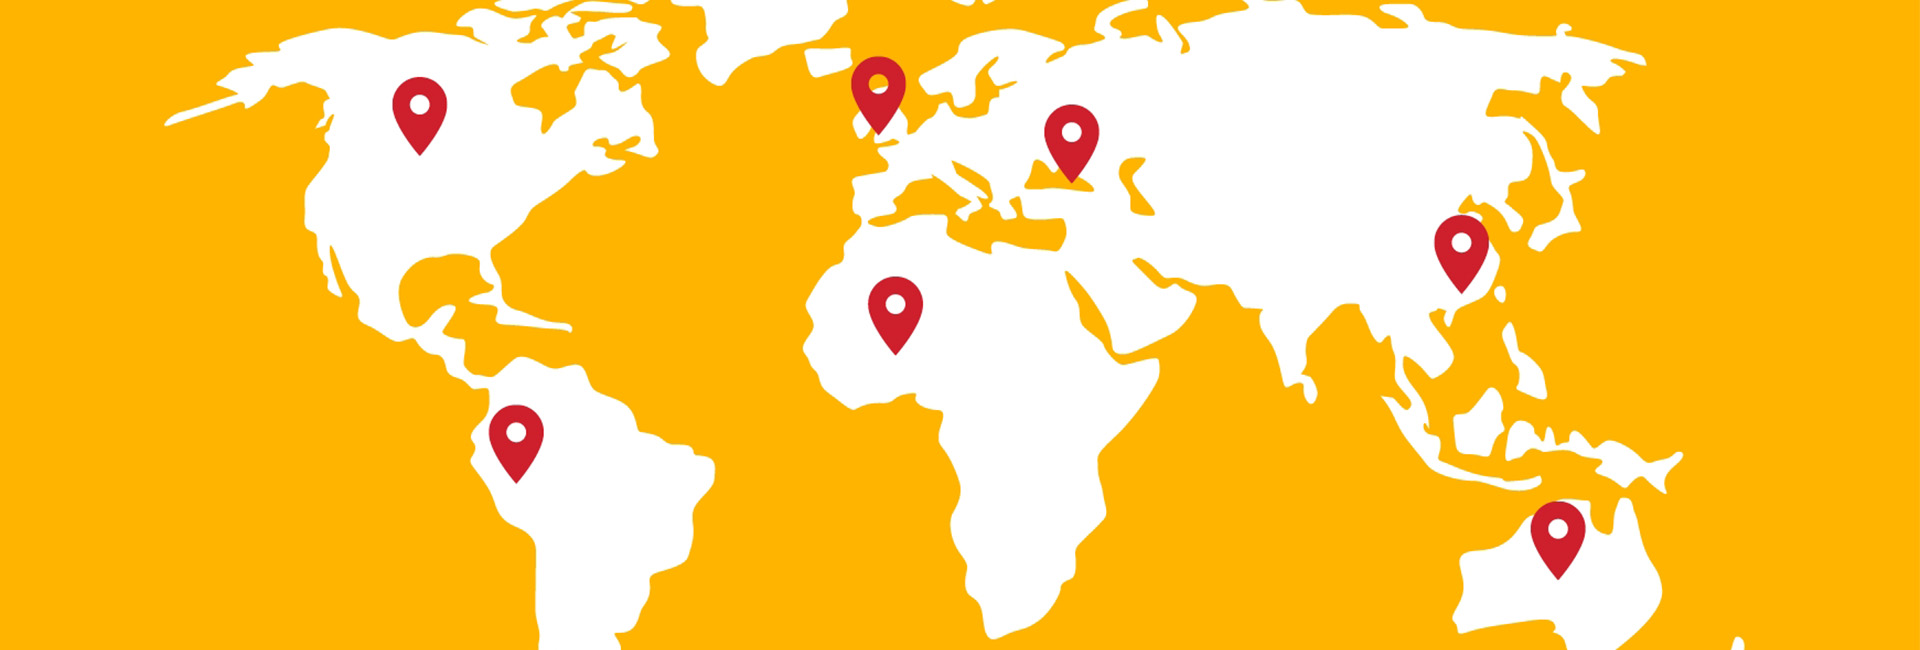 Continents in white on a yellow background with one red location marker in each continent